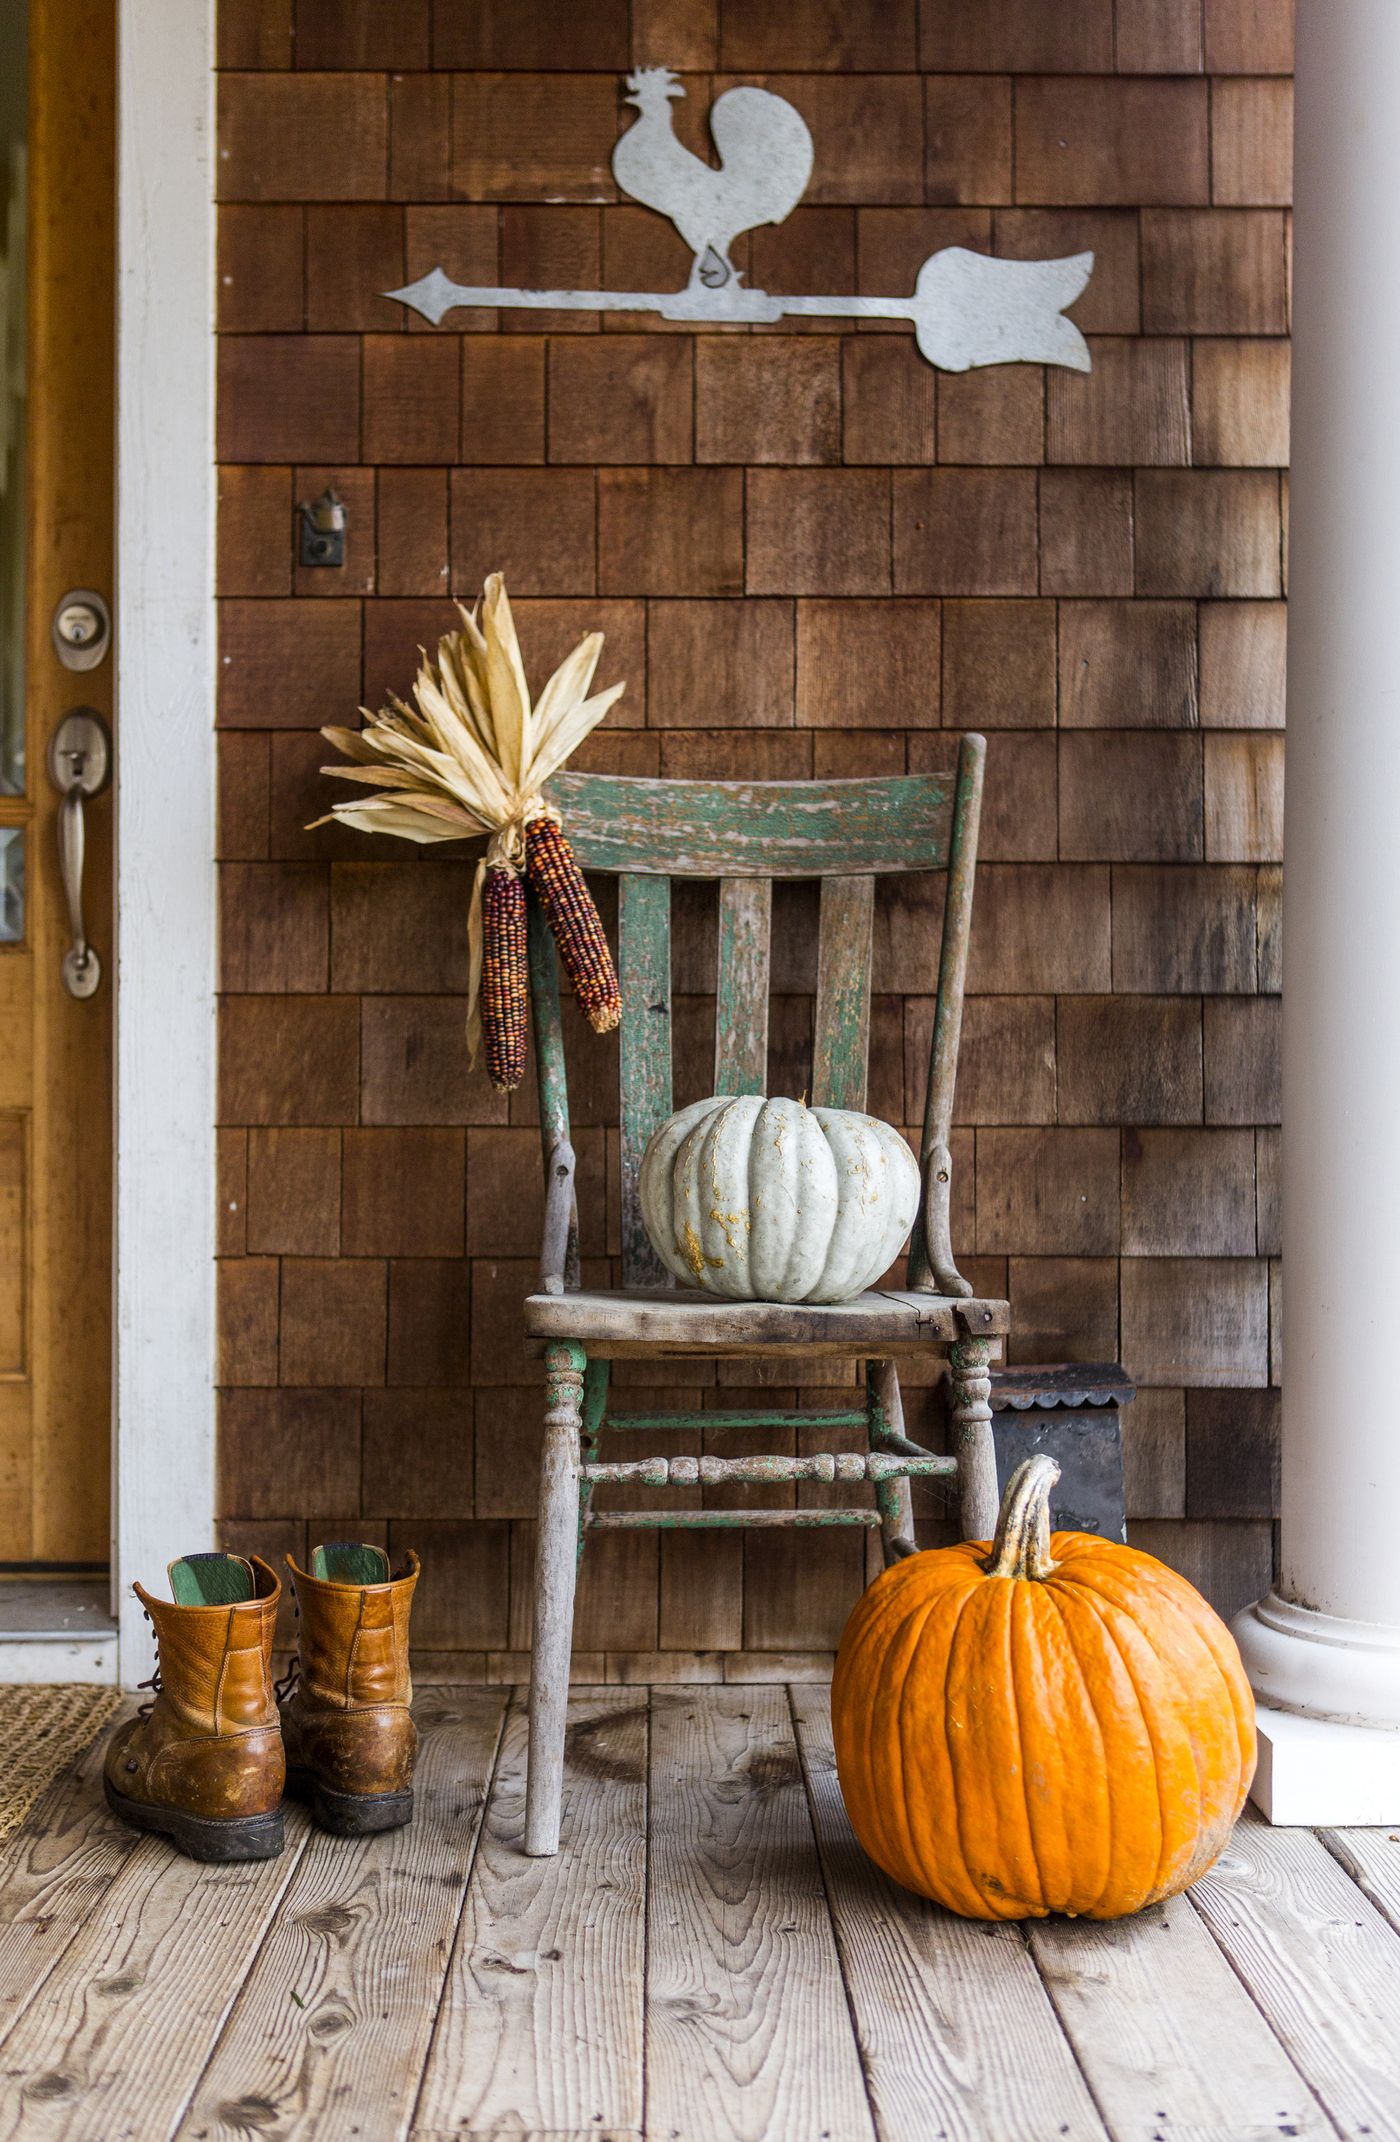 https://hips.hearstapps.com/hmg-prod/images/pumpkins-and-corn-on-porch-with-boots-in-autumn-royalty-free-image-1691608390.jpg